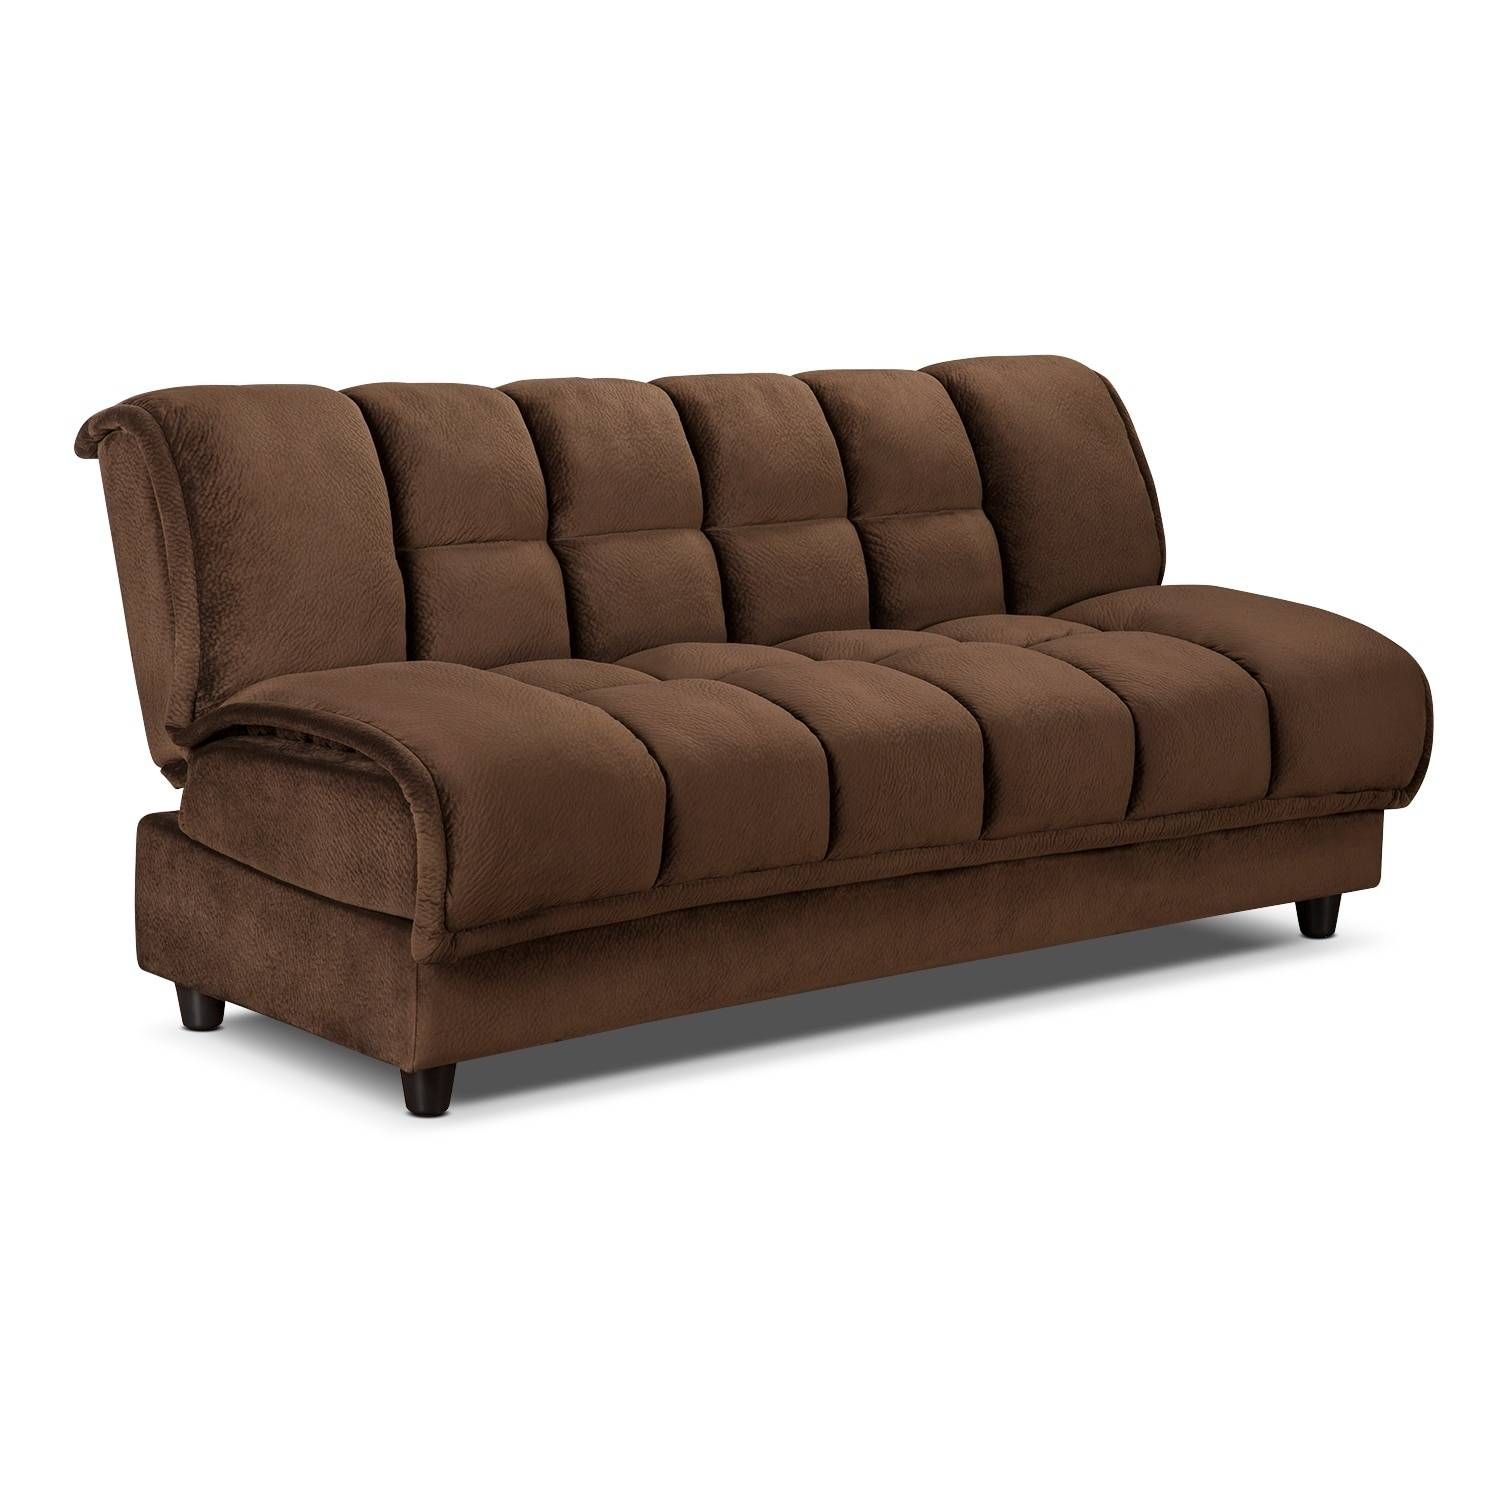 Sleeper Sofas | Value City Furniture | Value City Furniture In City Sofa Beds (View 1 of 30)